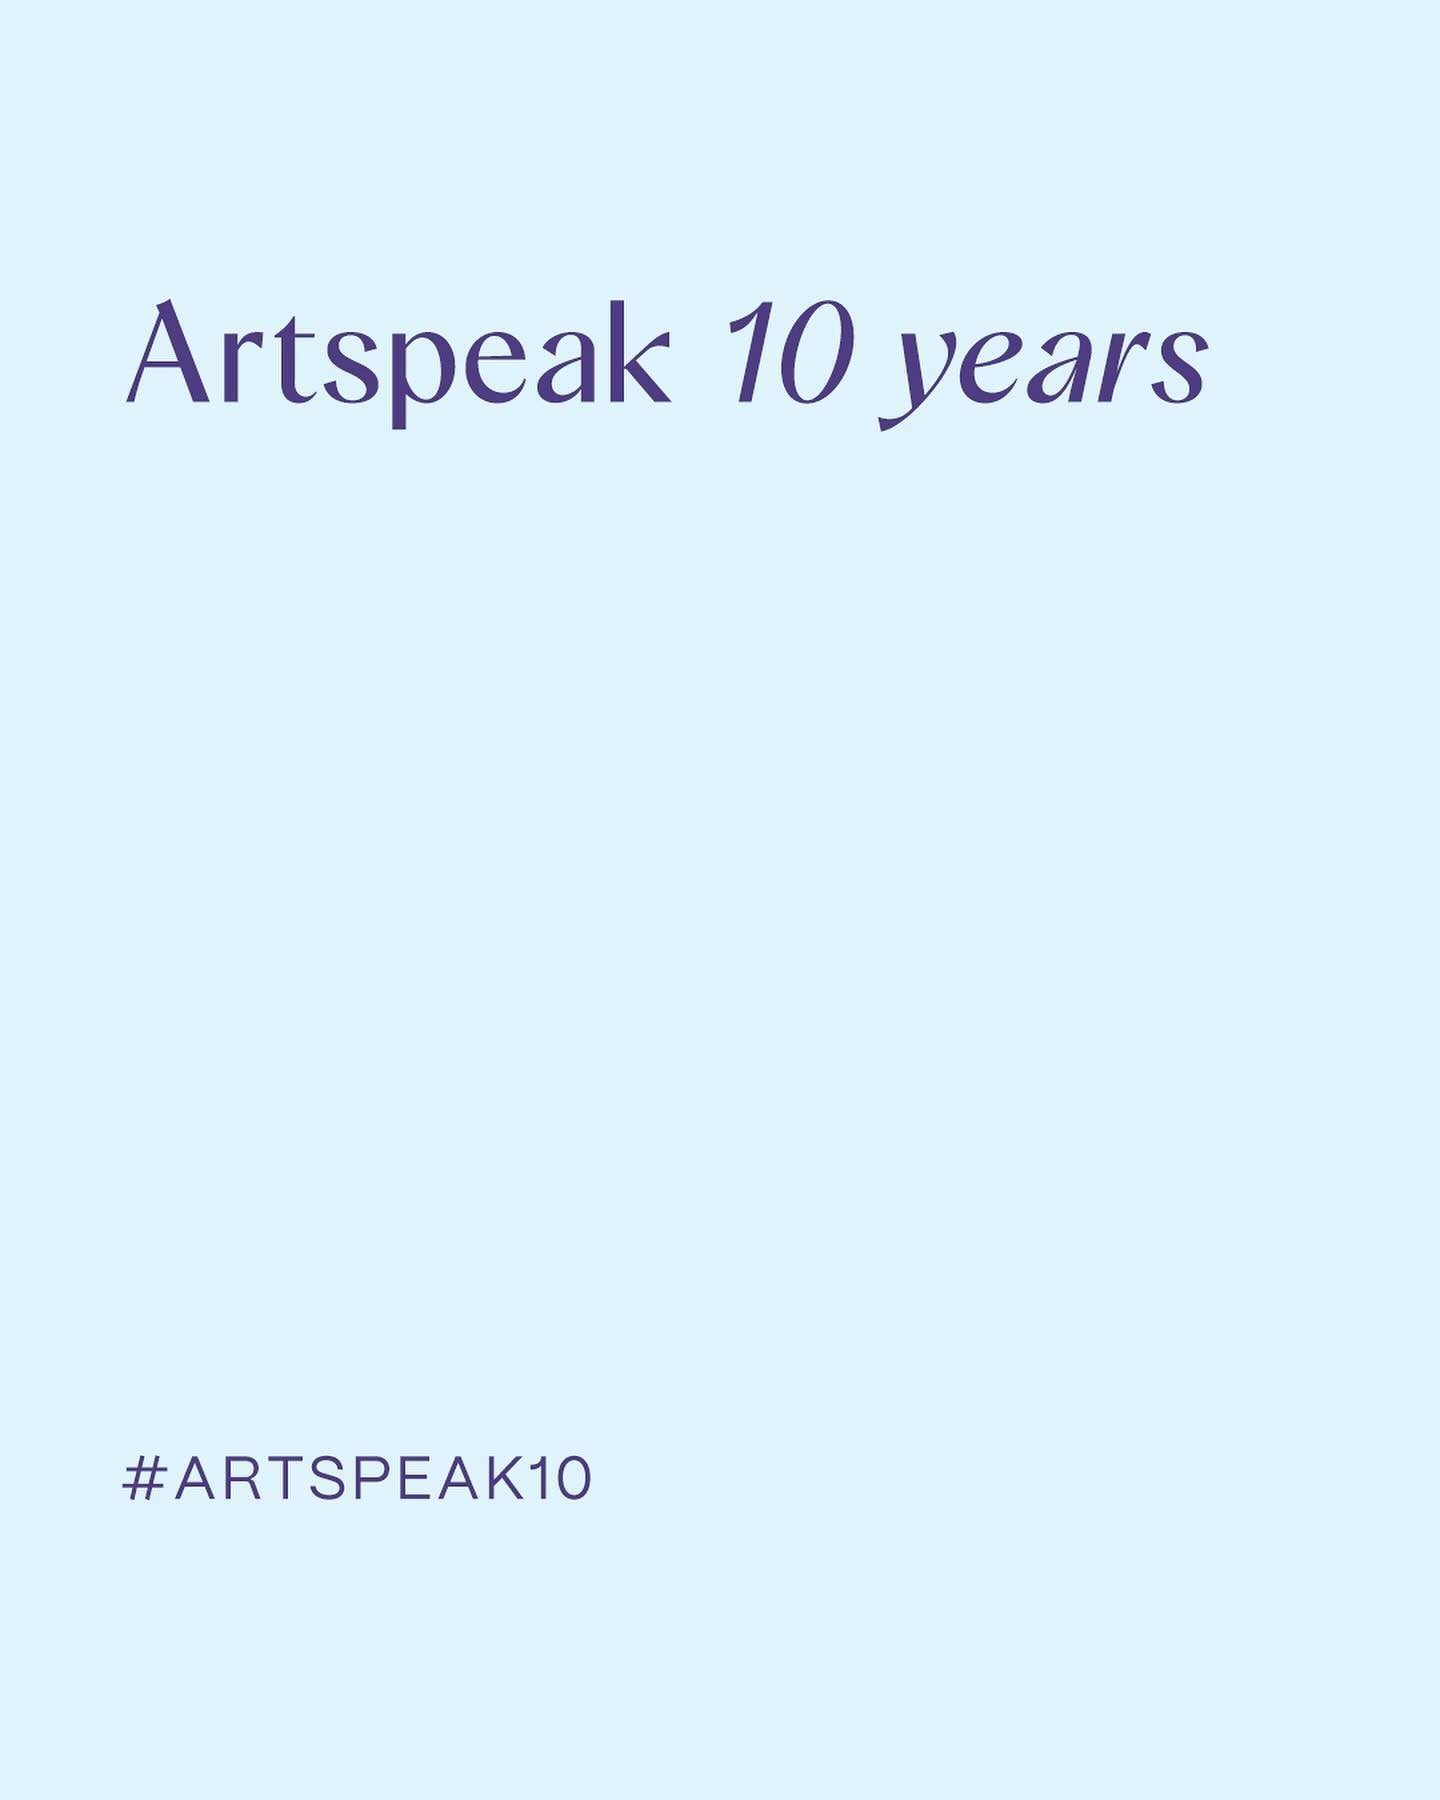 Today was a special day! It&rsquo;s been exactly 10 years since our co-founder @nicsiv published our first Instagram post! Look at the memory and follow our reflection on the last 10 years of Artspeak that we will share with you during the year. We k